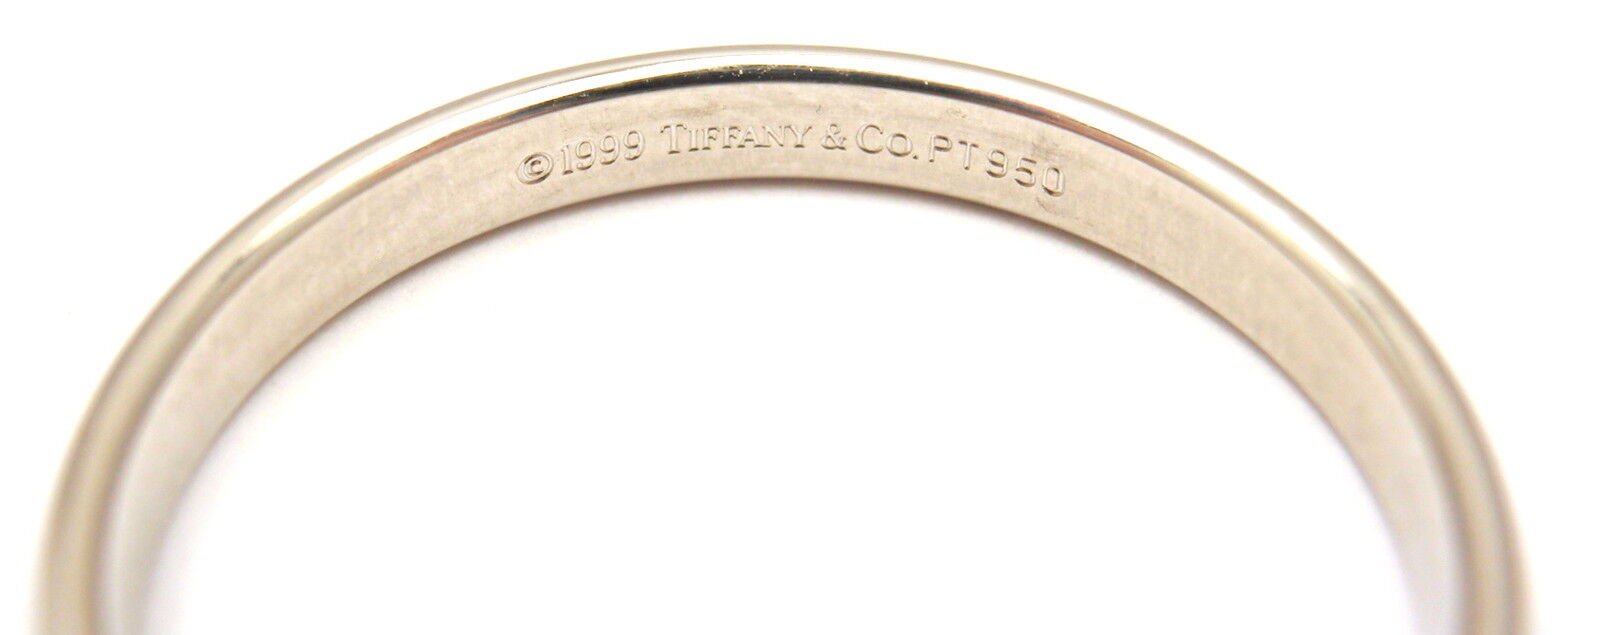 Tiffany & Co. Jewelry & Watches:Fine Jewelry:Rings TIFFANY & Co. PLATINUM 3MM MENS WEDDING BAND RING, SIZE 11.25